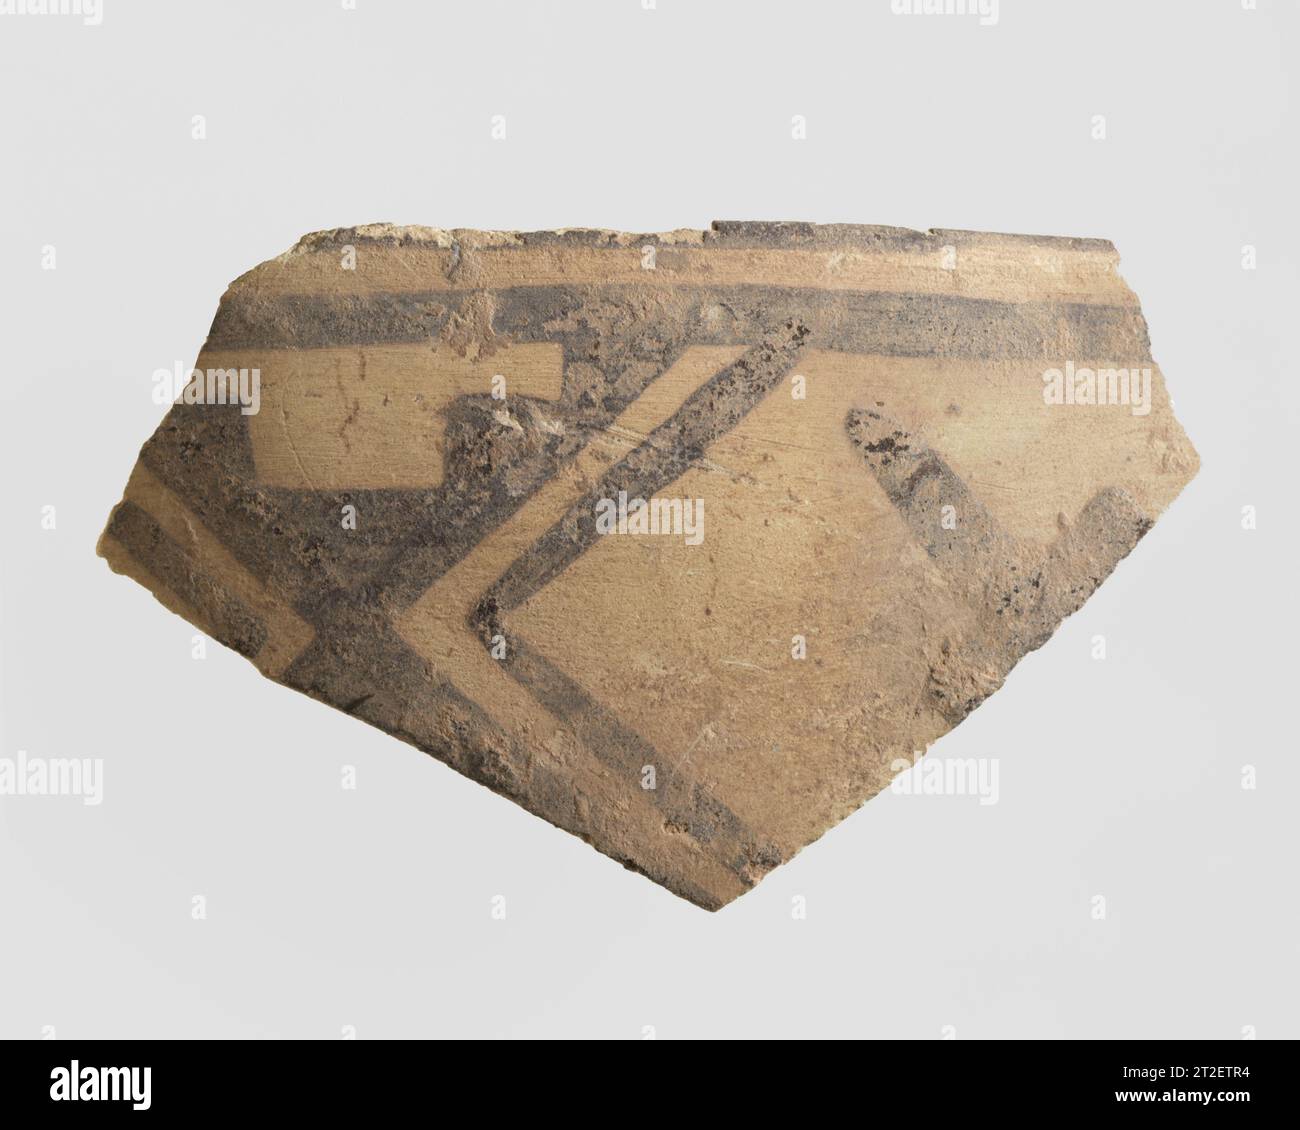 Sherd Iran ca. 2700–2500 BCE This sherd is made of a buff clay, with brown painted decoration. It is typical of Namazga IV ceramics from Turkmenistan, dating to ca. 2700-2500 B.C. It was excavated in 1937 at a prehistoric site in the vicinity of Nishapur in northeastern Iran. While Nishapur itself was founded by the Sasanian king Shapur I (reigned ca. A.D. 241-272), this sherd shows that human habitation there goes back to the prehistoric period. Furthermore, the prehistoric pottery from Nishapur has close affinities with ceramic materials from Central Asia rather than with contemporary sites Stock Photo